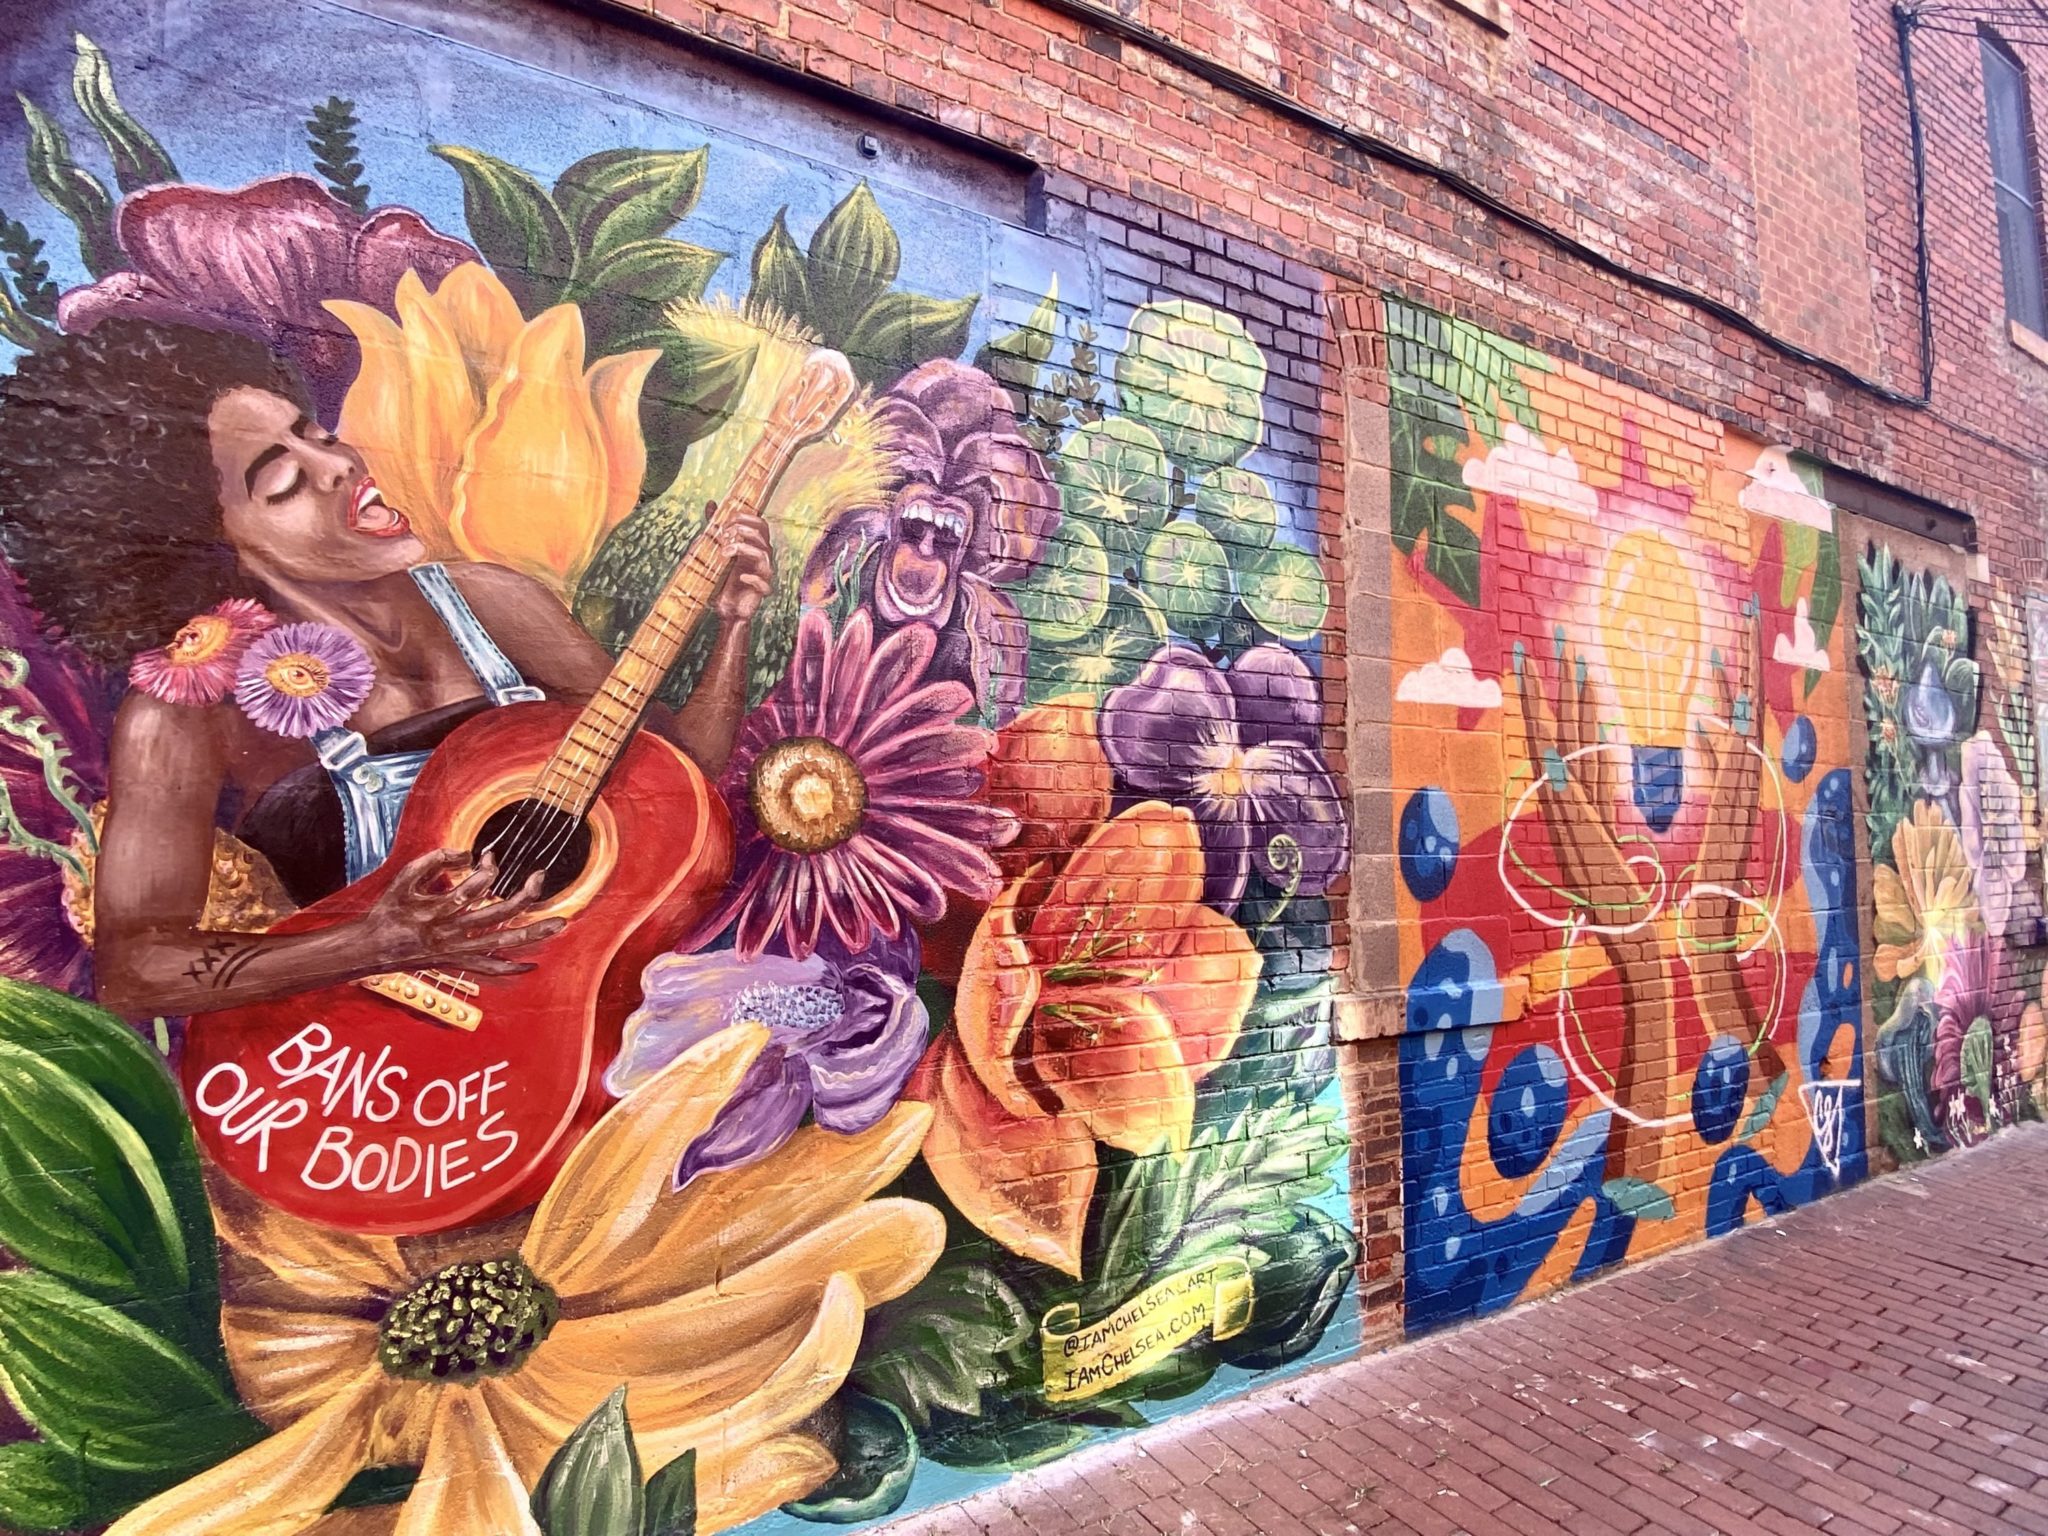 PHOTOS: This H Street Alley Is Filled With Colorful Murals